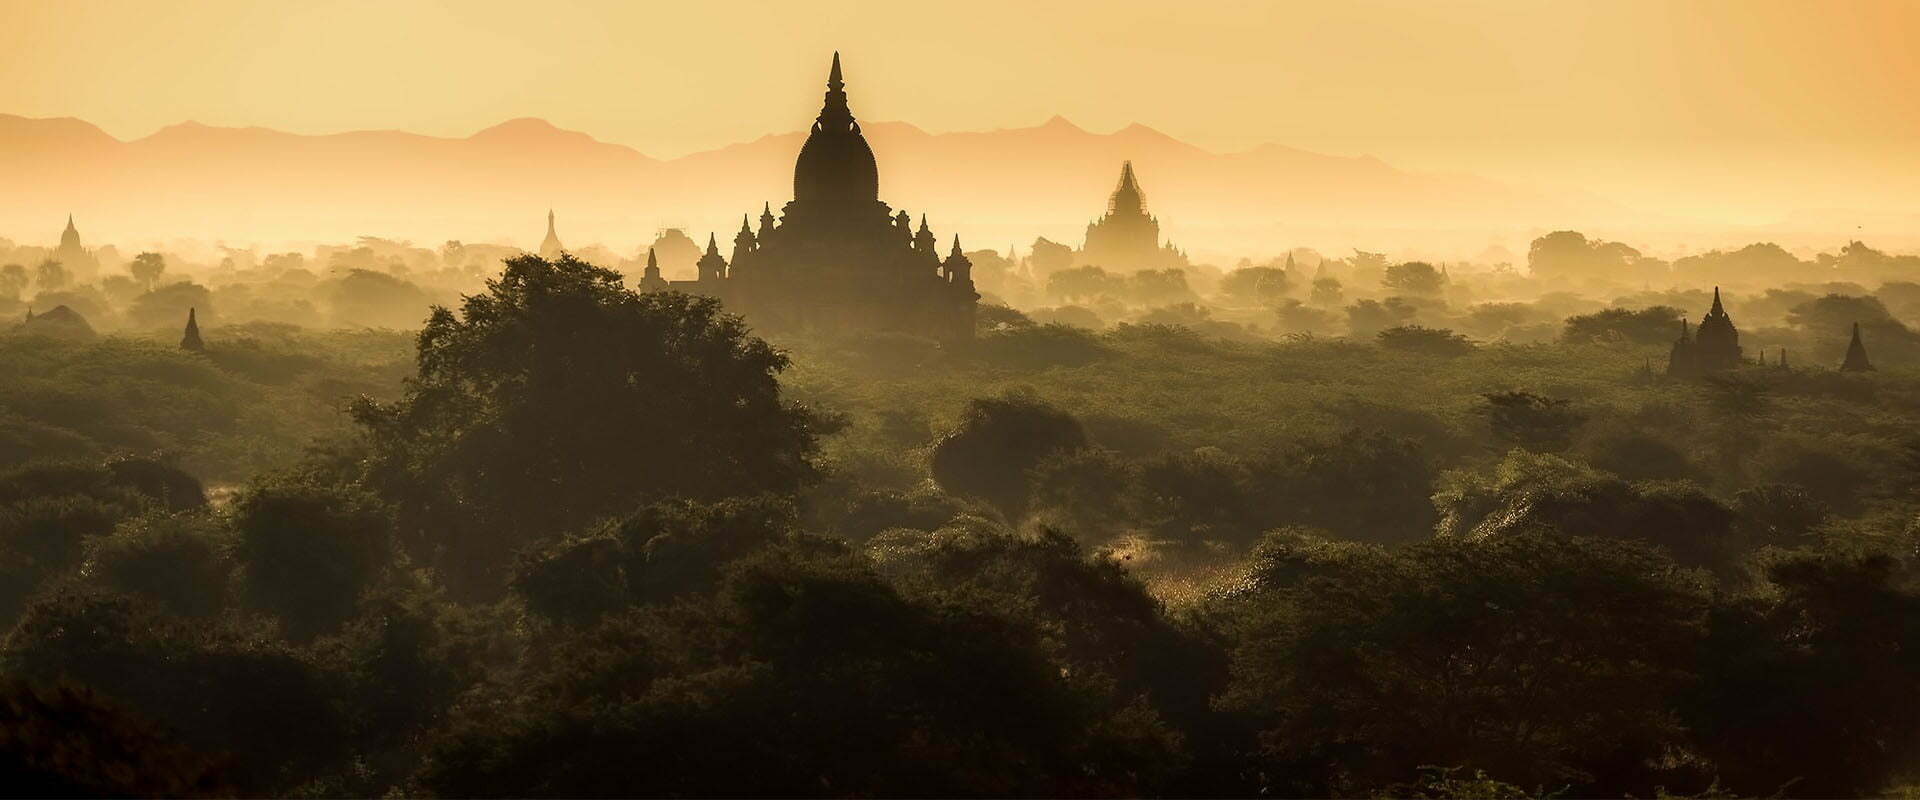 Sunrise in Bagan. Myanmar. Come and see it with Hanoi Voyages